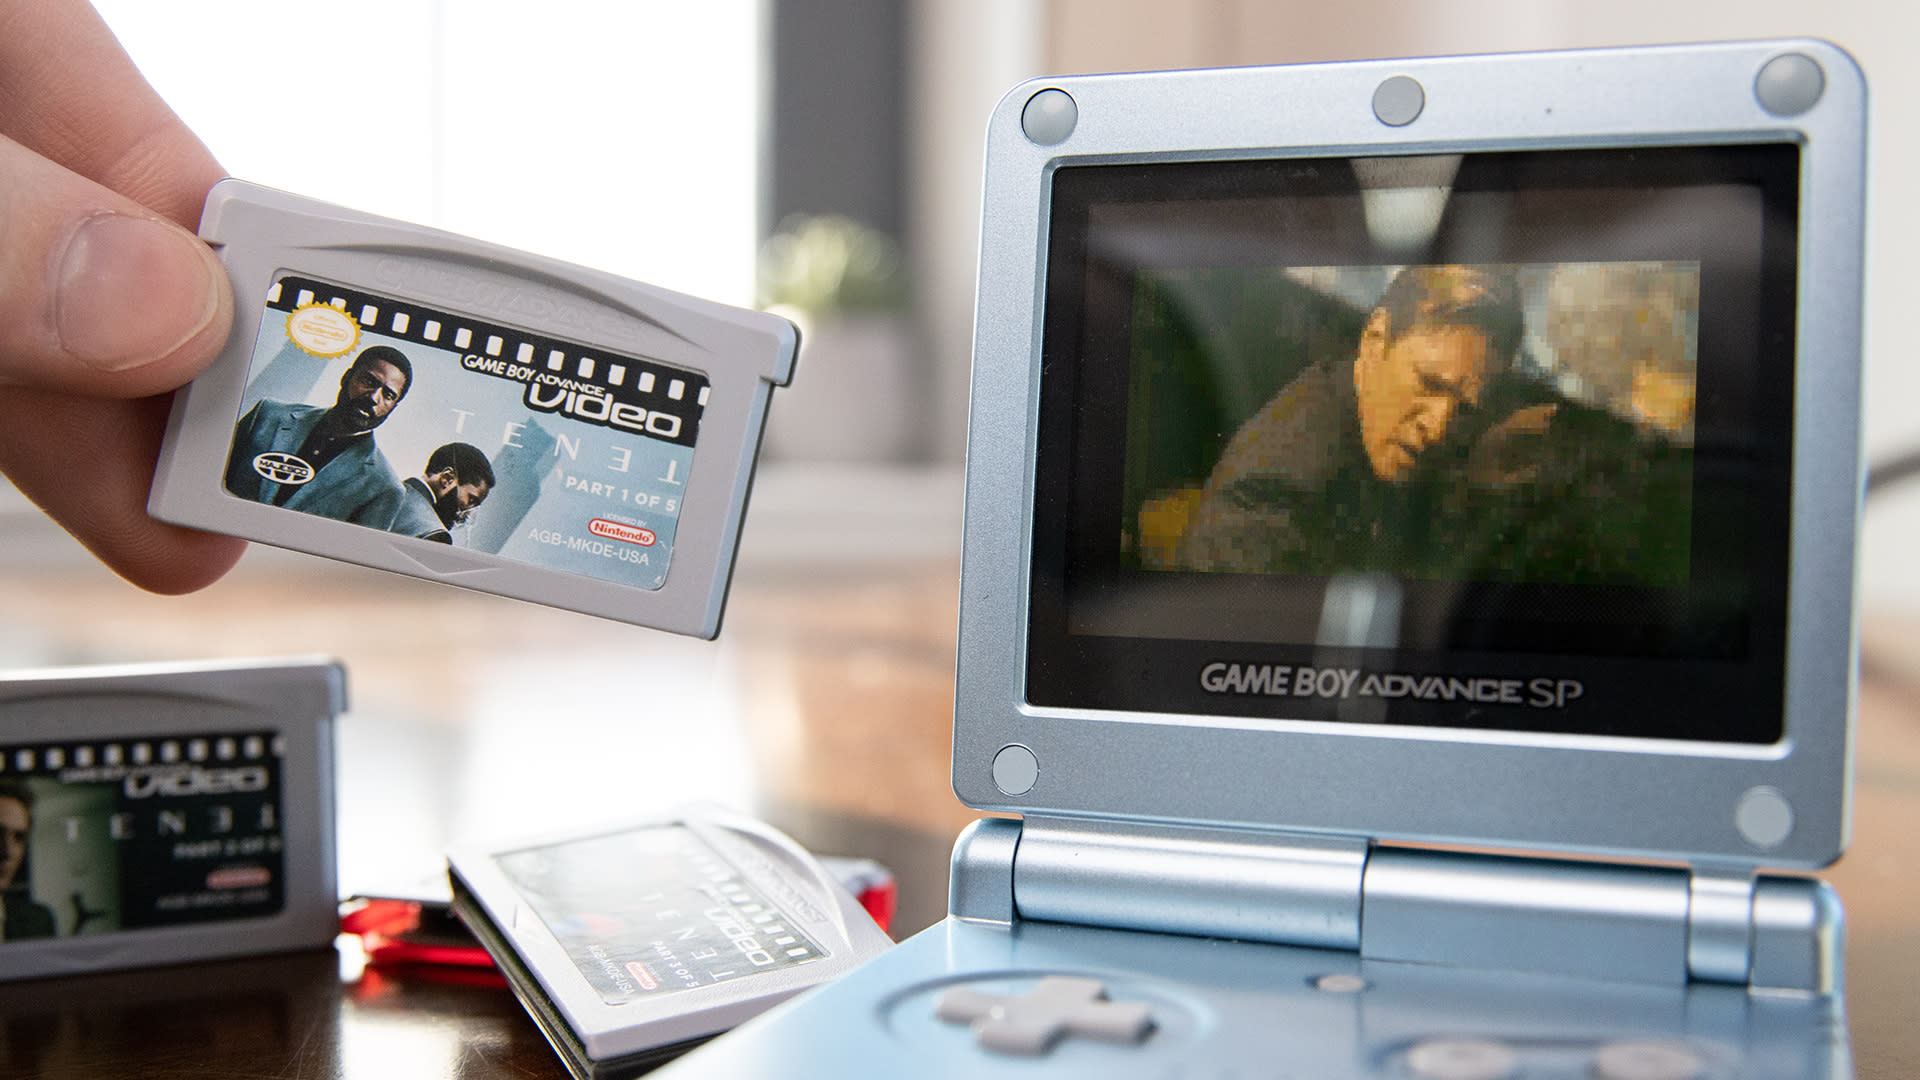 A YouTuber stuck ‘Tenet’ in Game Boy Advance cartridges out of spite